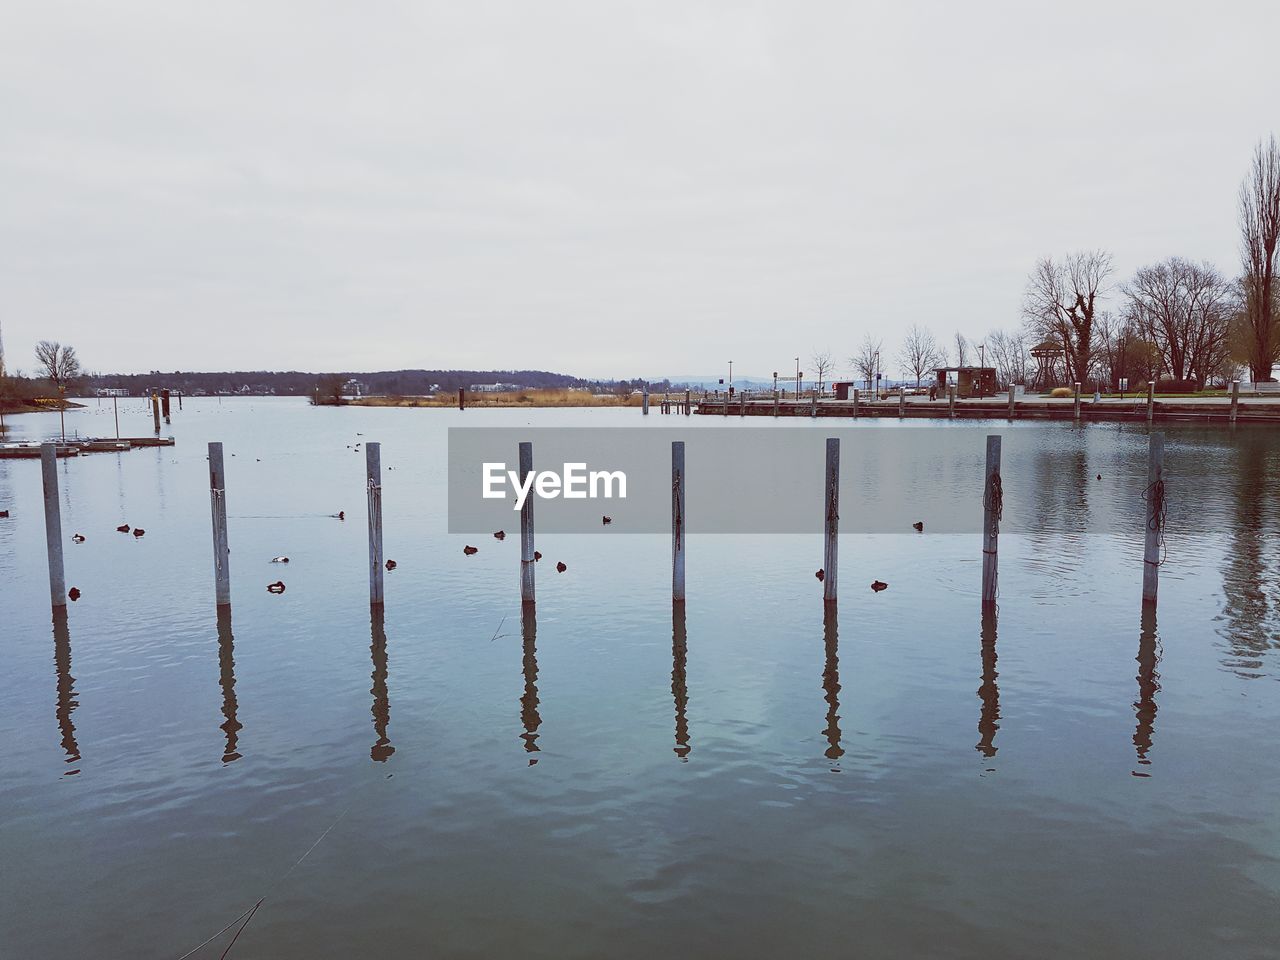 WOODEN POSTS IN LAKE